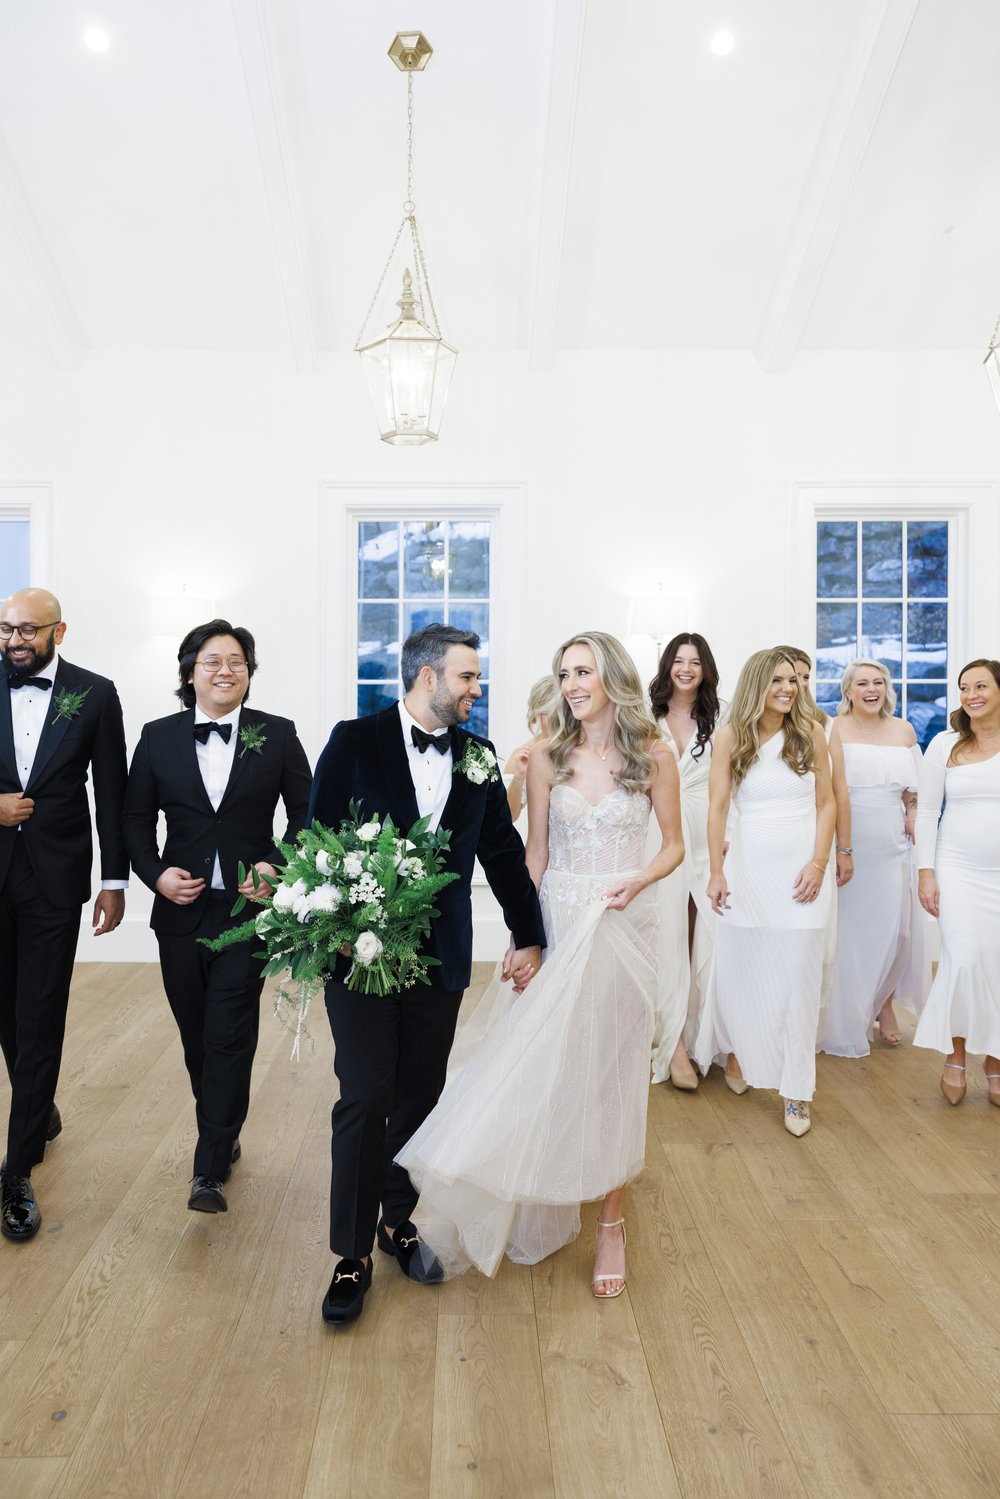  The bridal party walks onto the dance floor to party at the NYE wedding by Savanna Richardson Photography. NYE wedding #SavannaRichardsonPhotography #SavannaRichardsonWeddings #NYEwedding #magicalwedding #snowywedding #holidaywedding #married 